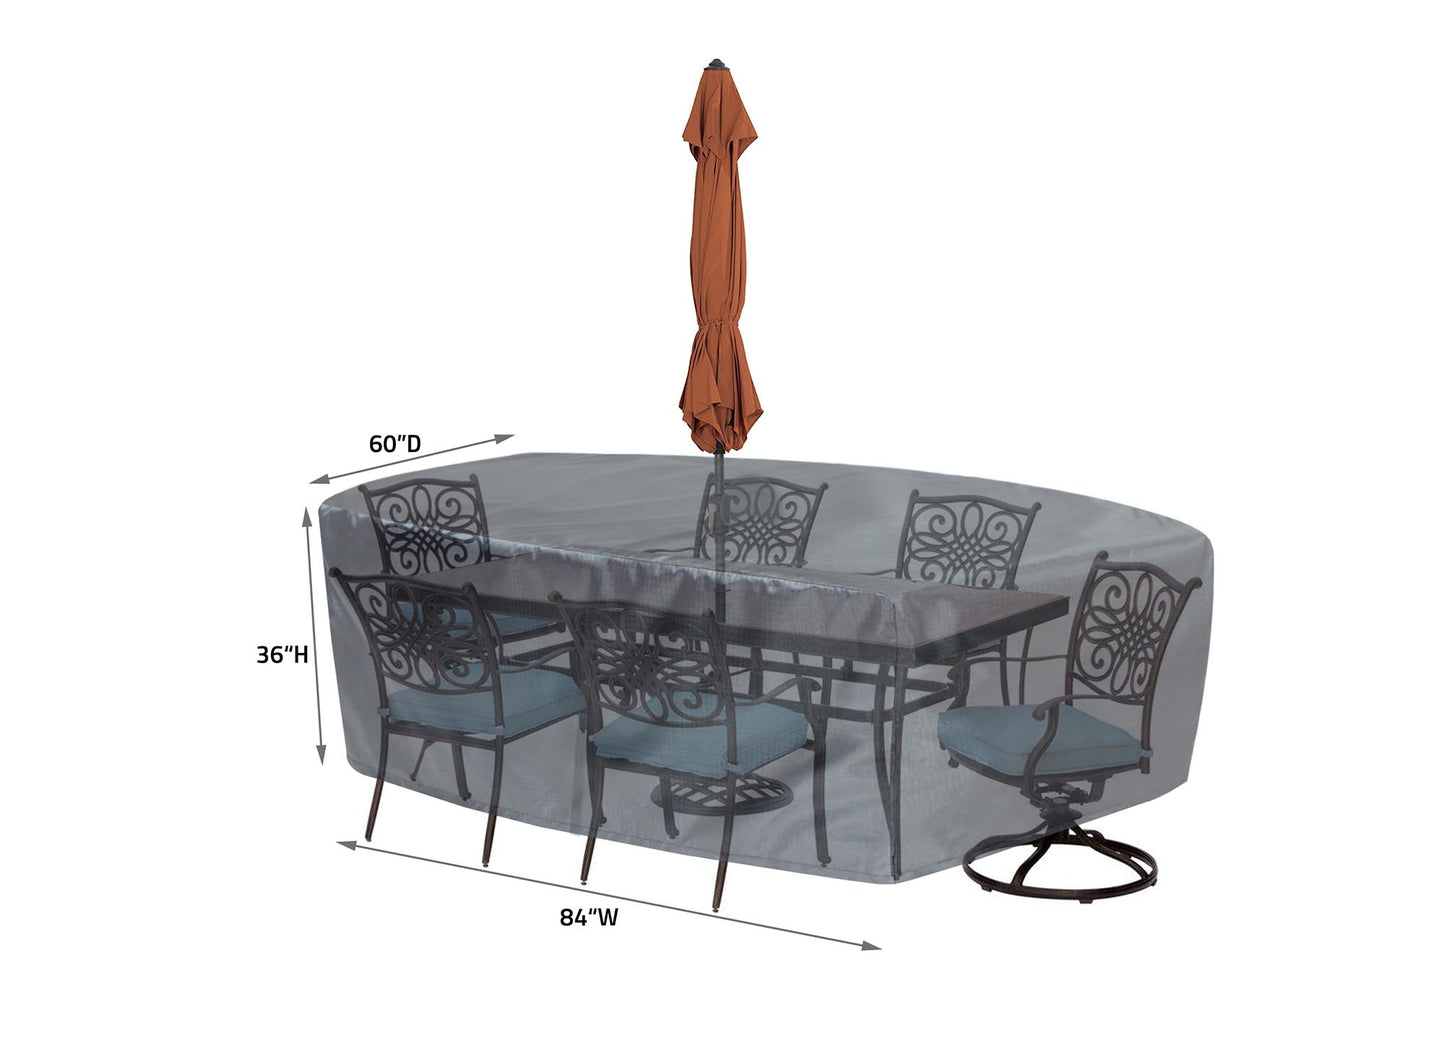 Shield Mercury Cover for 587 Fits Small Oval/Rectangle
Table & Chairs w/8 ties, velcro
closure, elastic & spring cinch lock